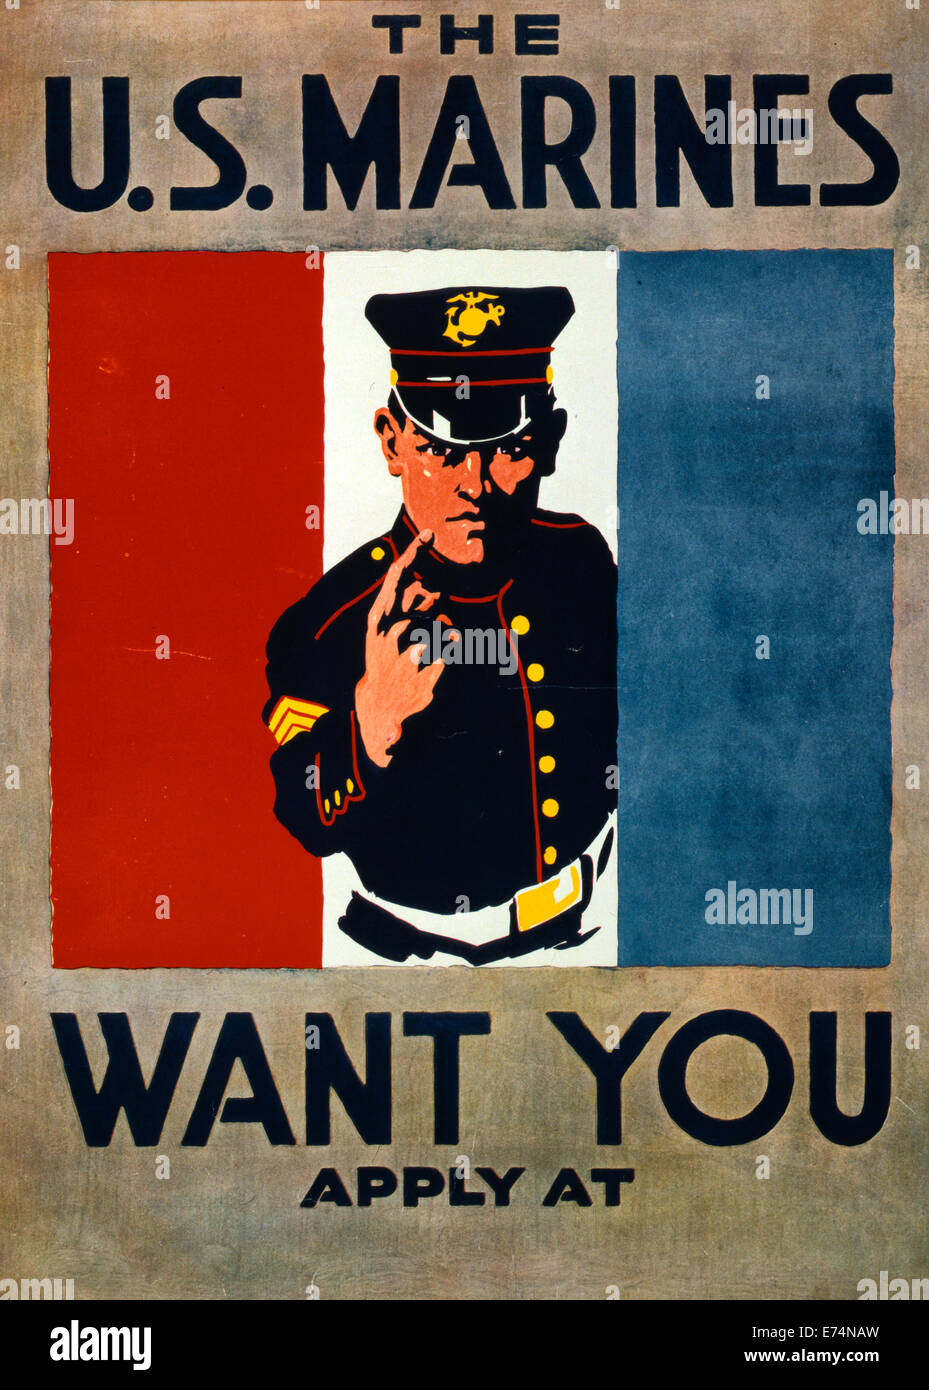 U.S. Marines Want You - U.S. Marines recruitment poster showing half-length portrait of marine gesturing with hand against red, white, and blue banners in the background, circa 1917 Stock Photo